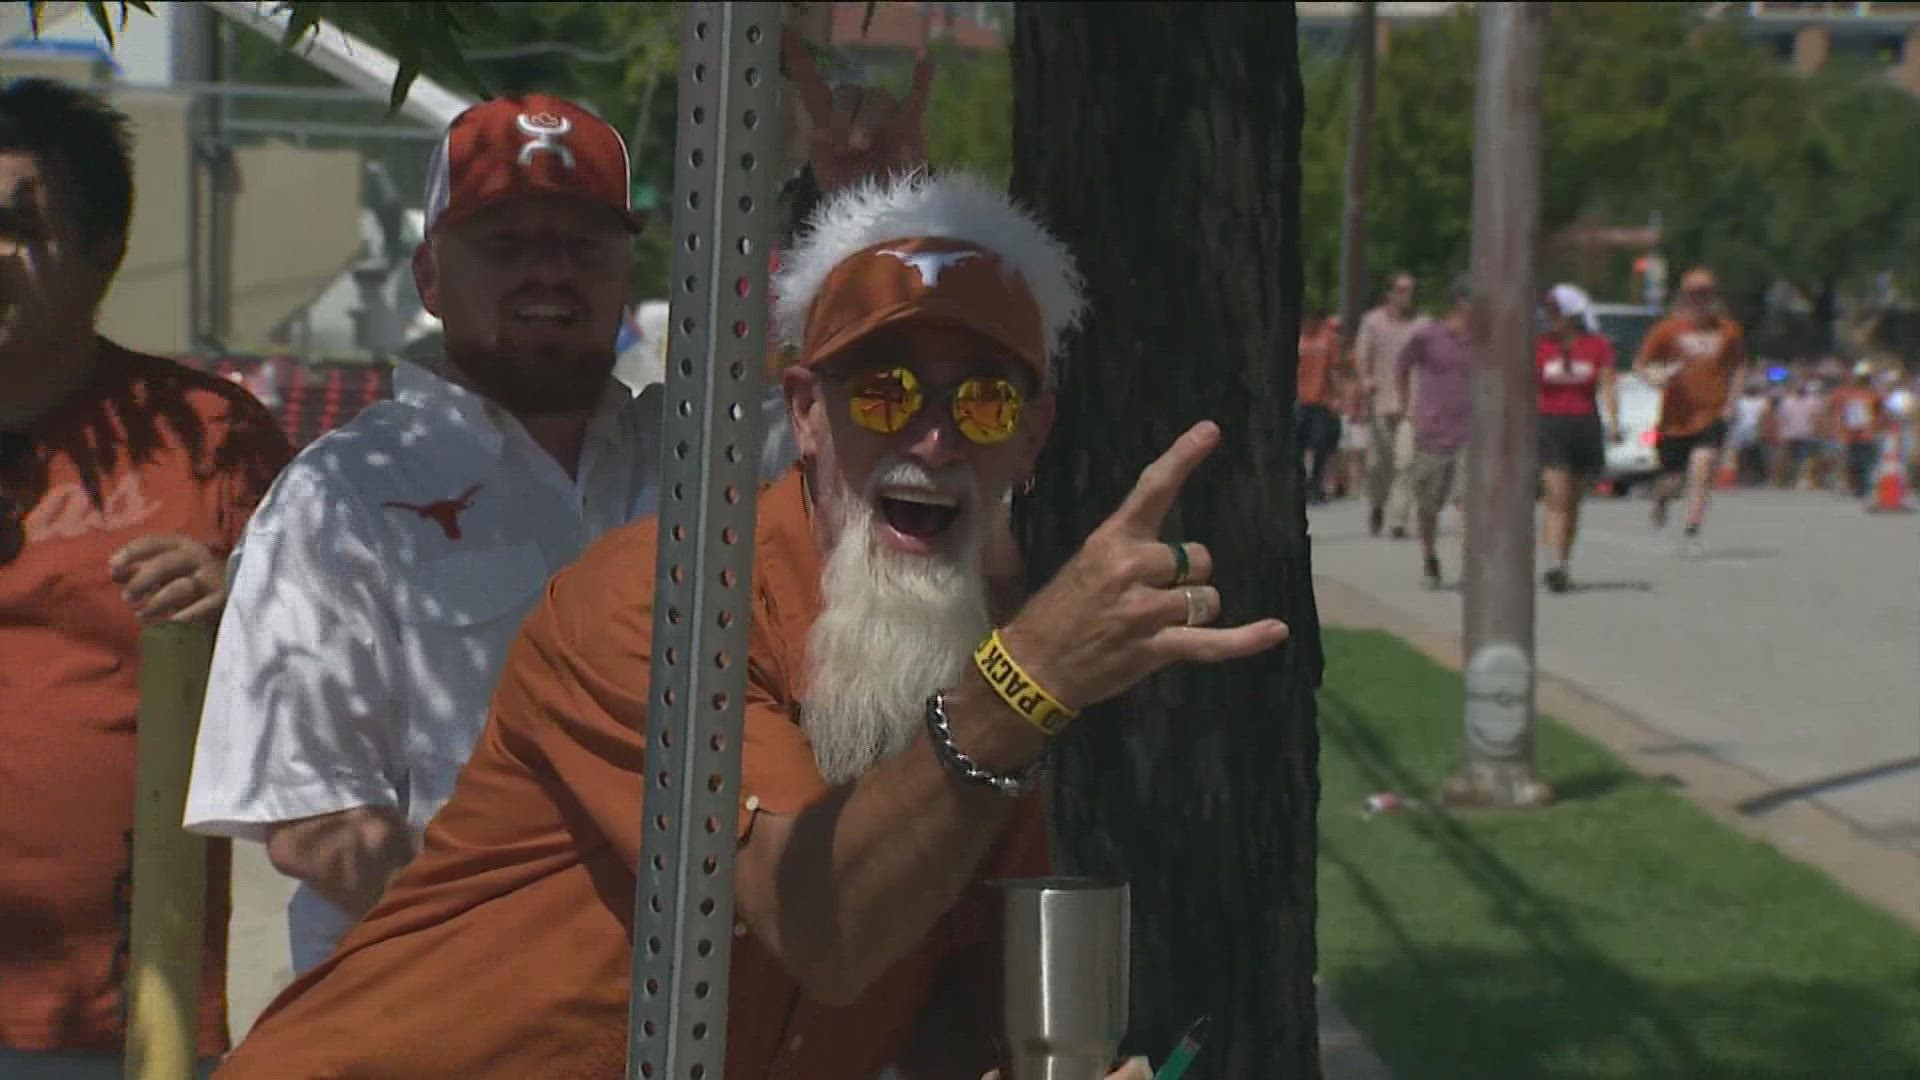 Tailgaters were out in Austin on Saturday, some as early as 7 a.m. Thousands celebrated right before the big game, bringing plenty of business downtown.